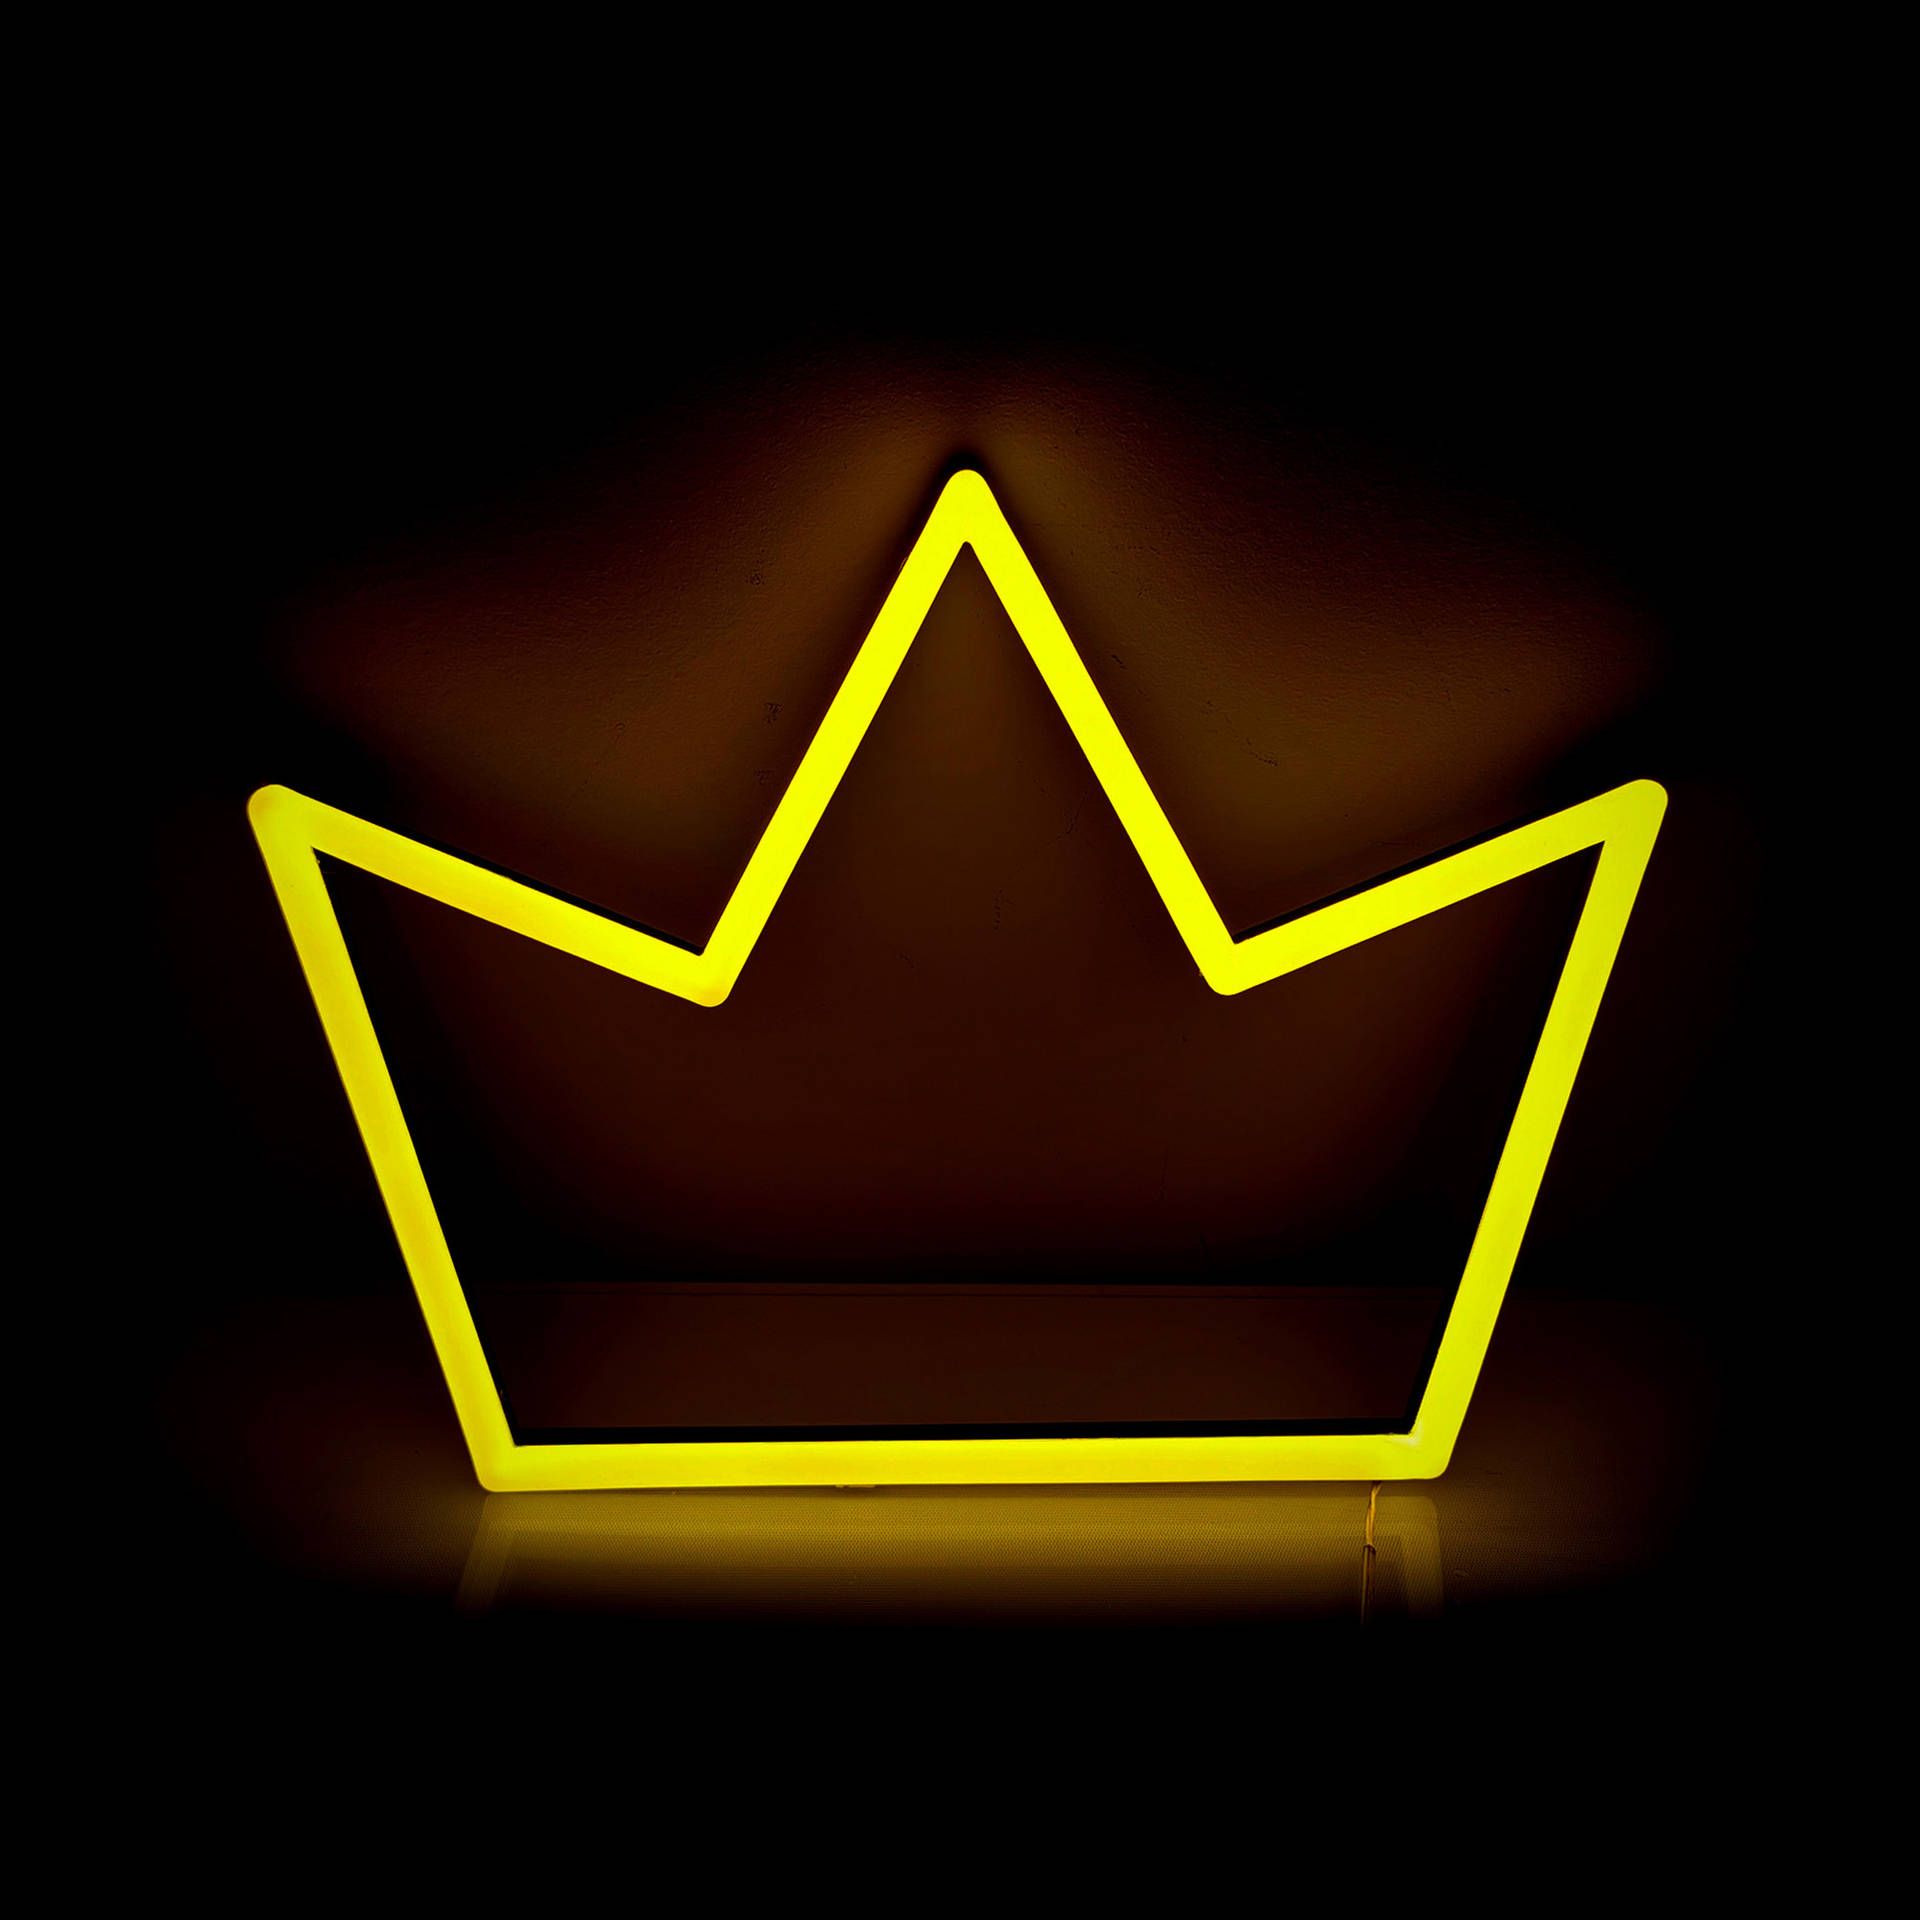 A neon sign in the shape of a crown. - Neon, crown